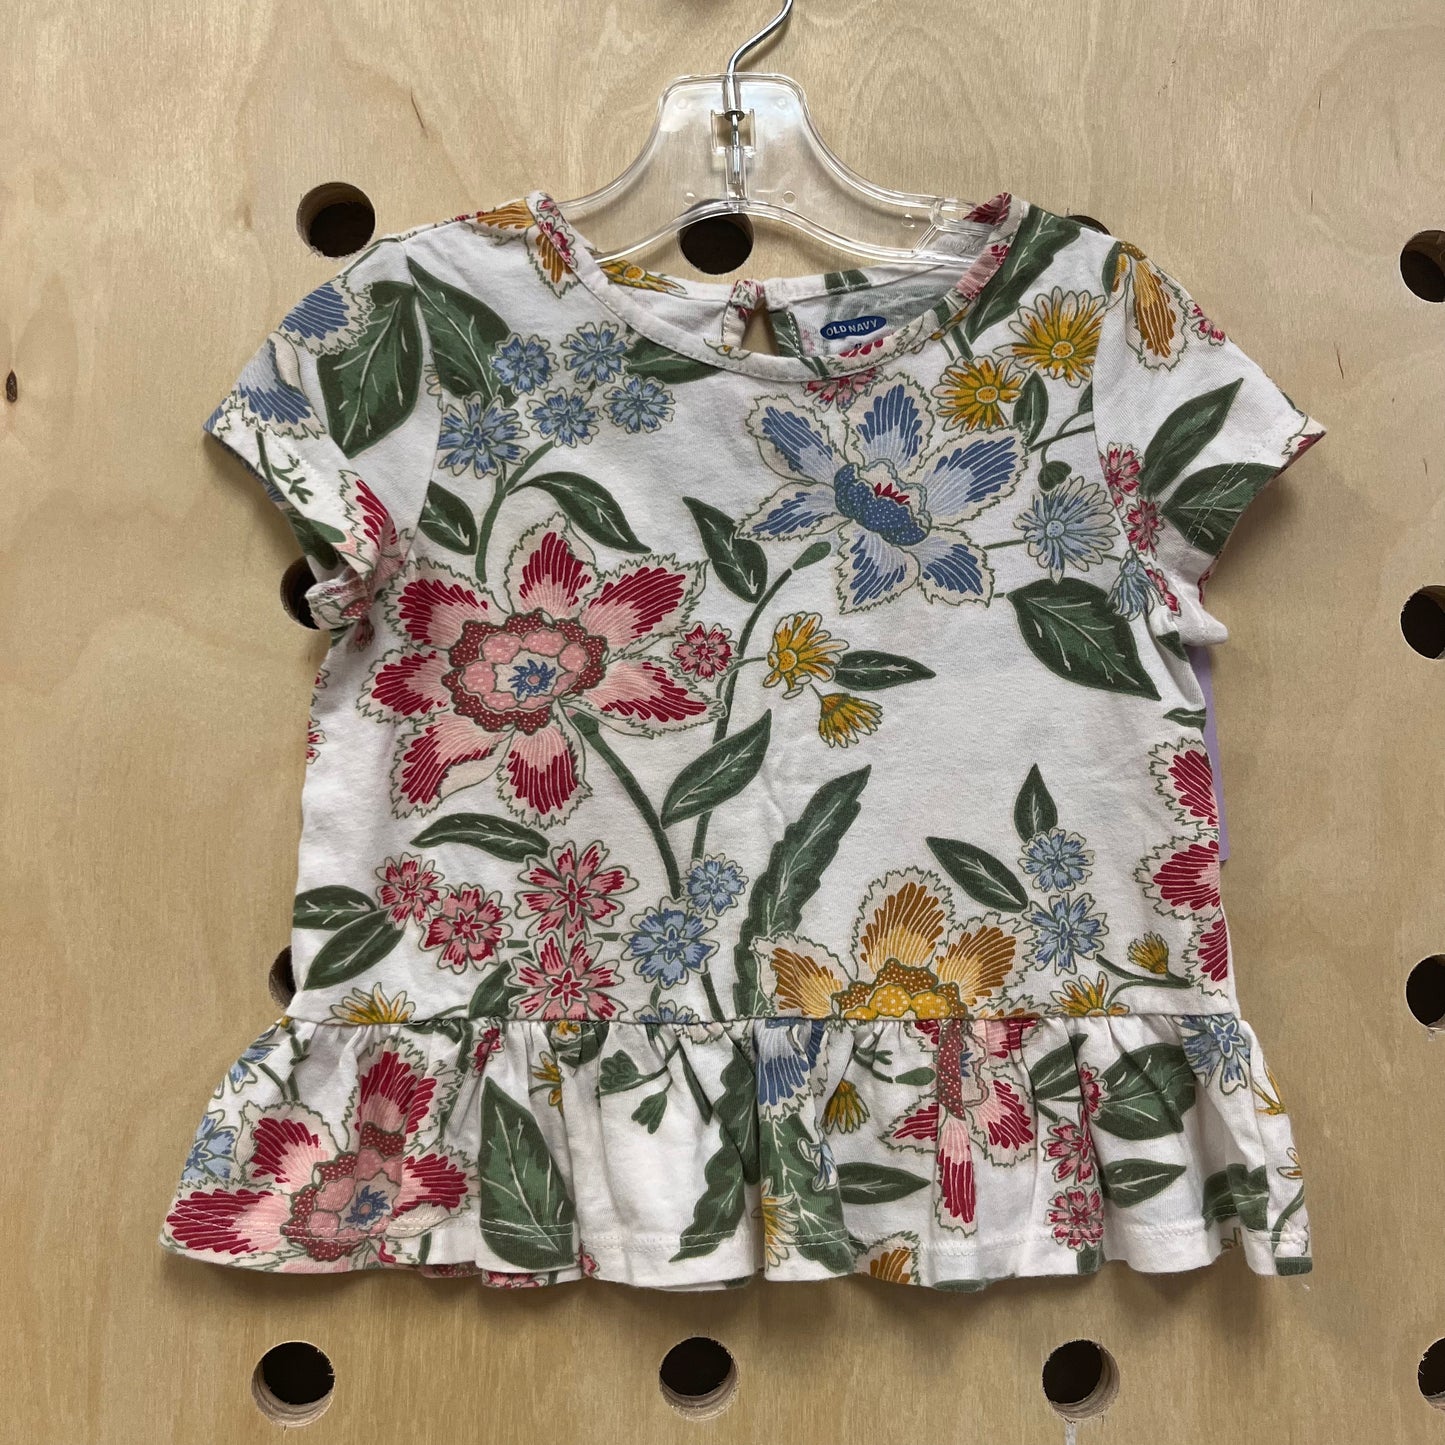 White Floral Top